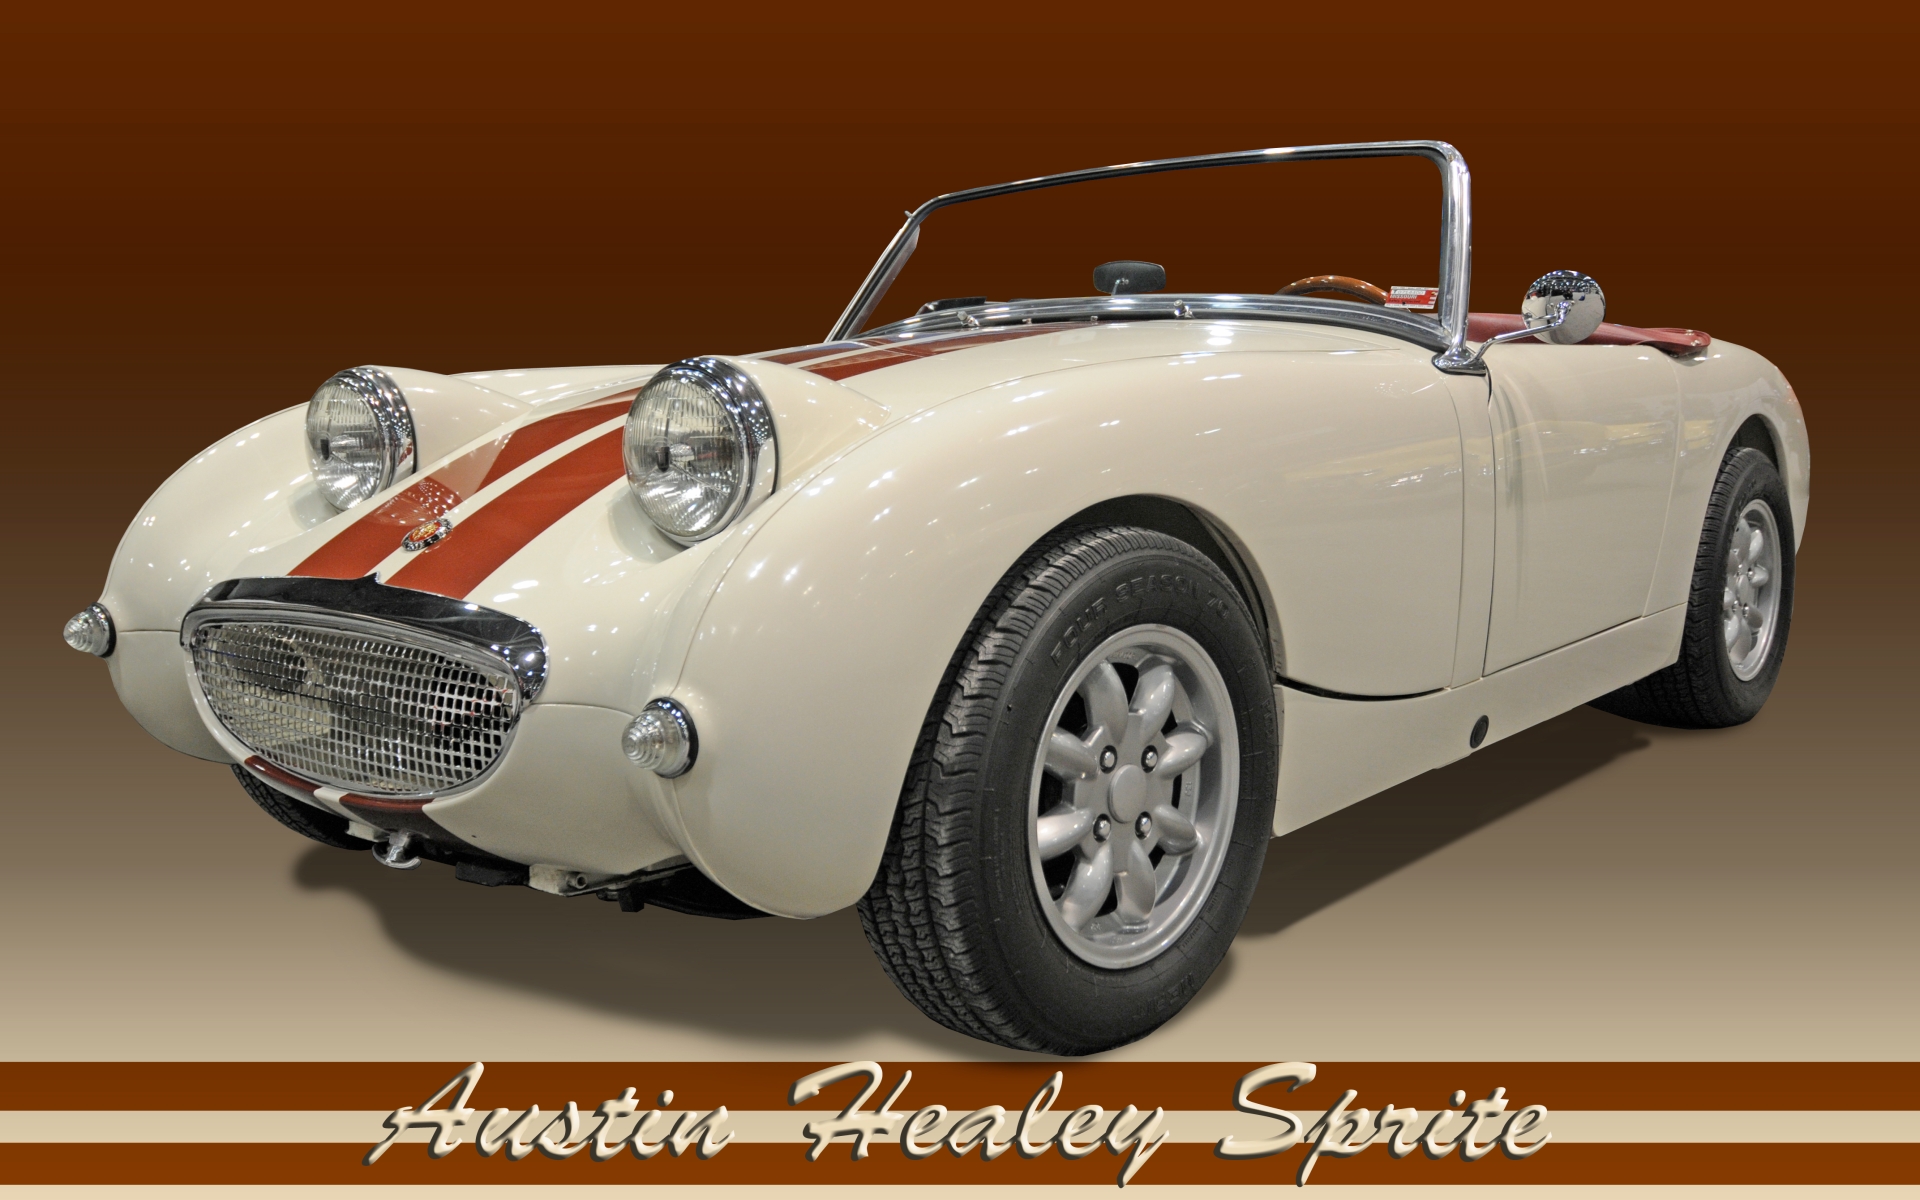 Austin Healey Wallpapers